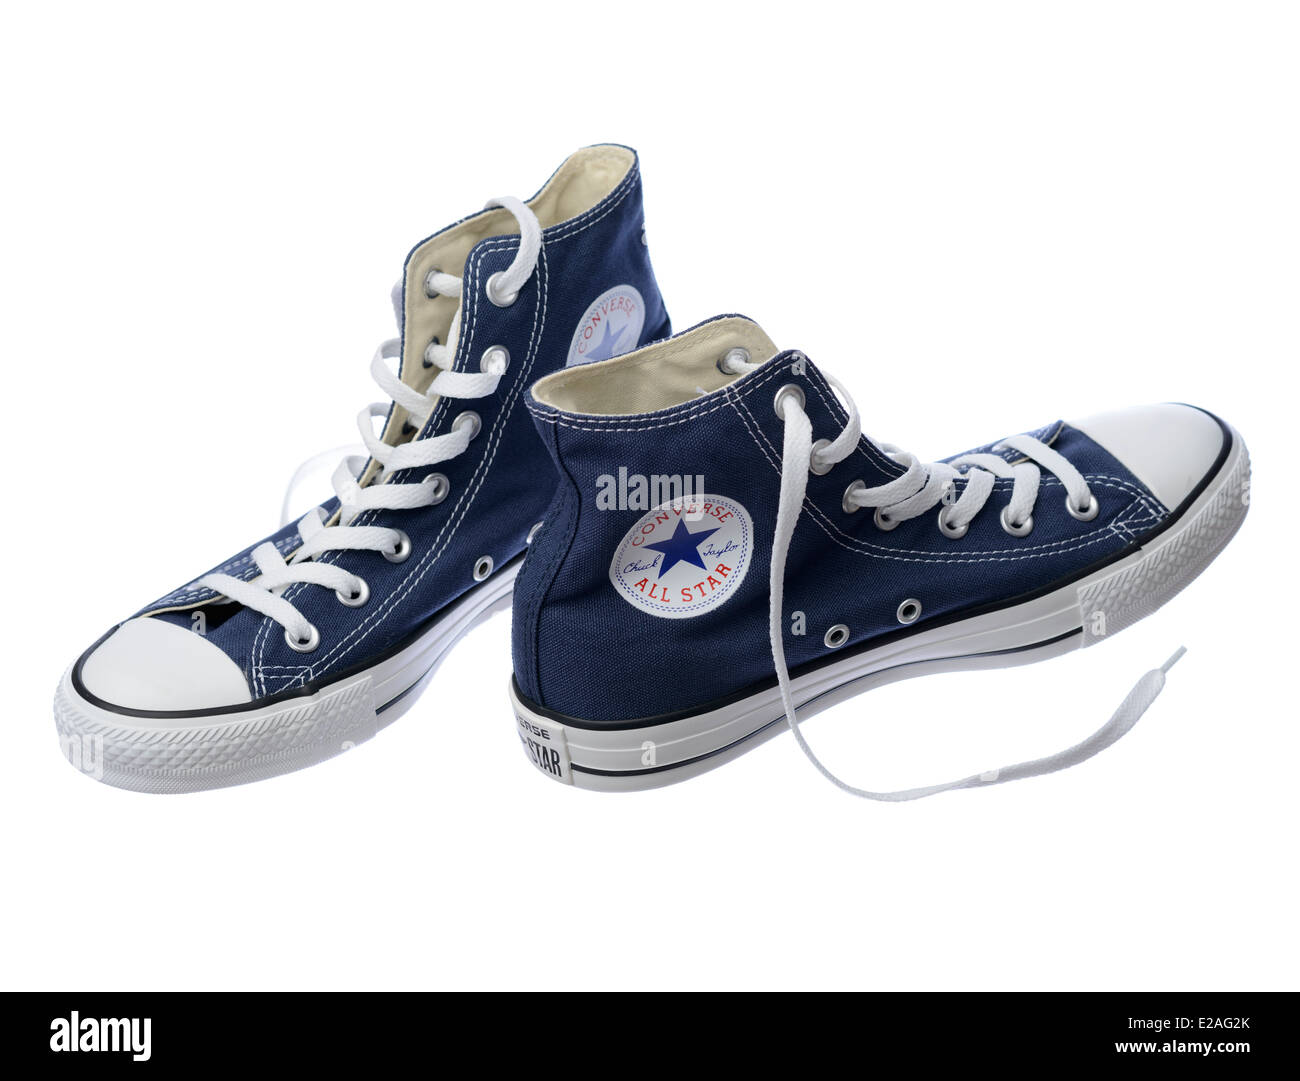 Converse Trainer High Resolution Stock Photography and Images - Alamy